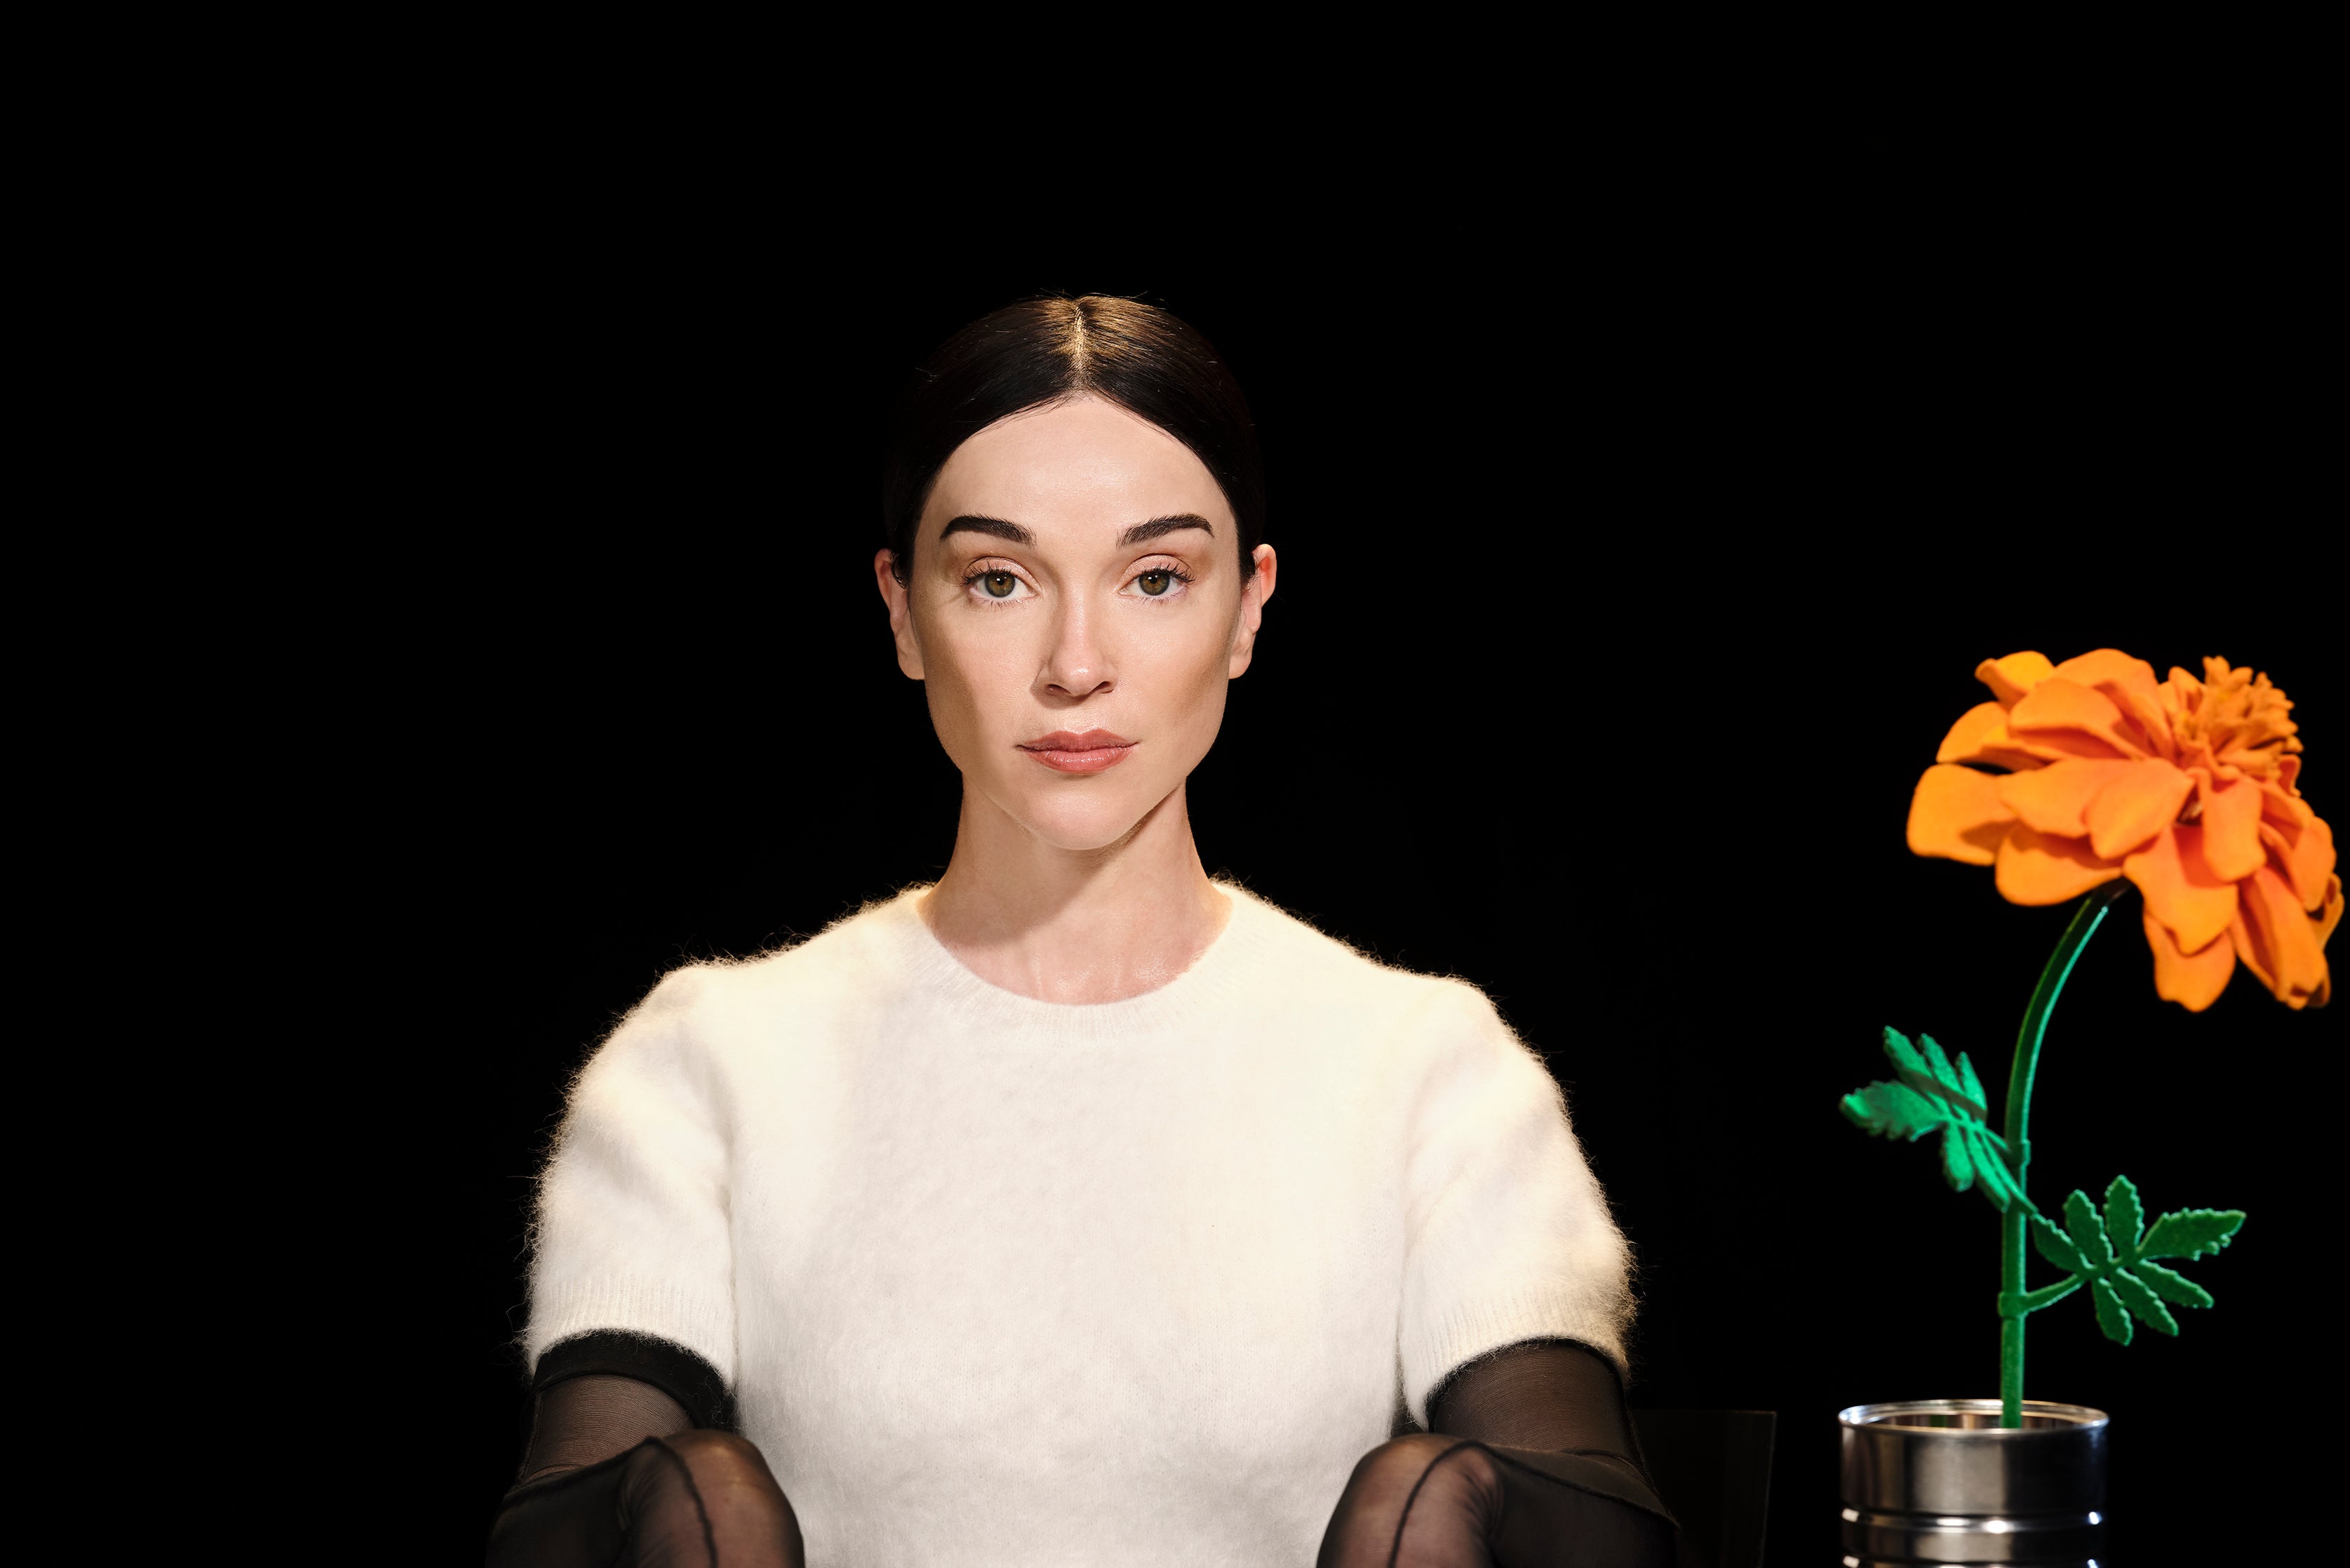 ‘All Born Screaming’ is the seventh album from St Vincent